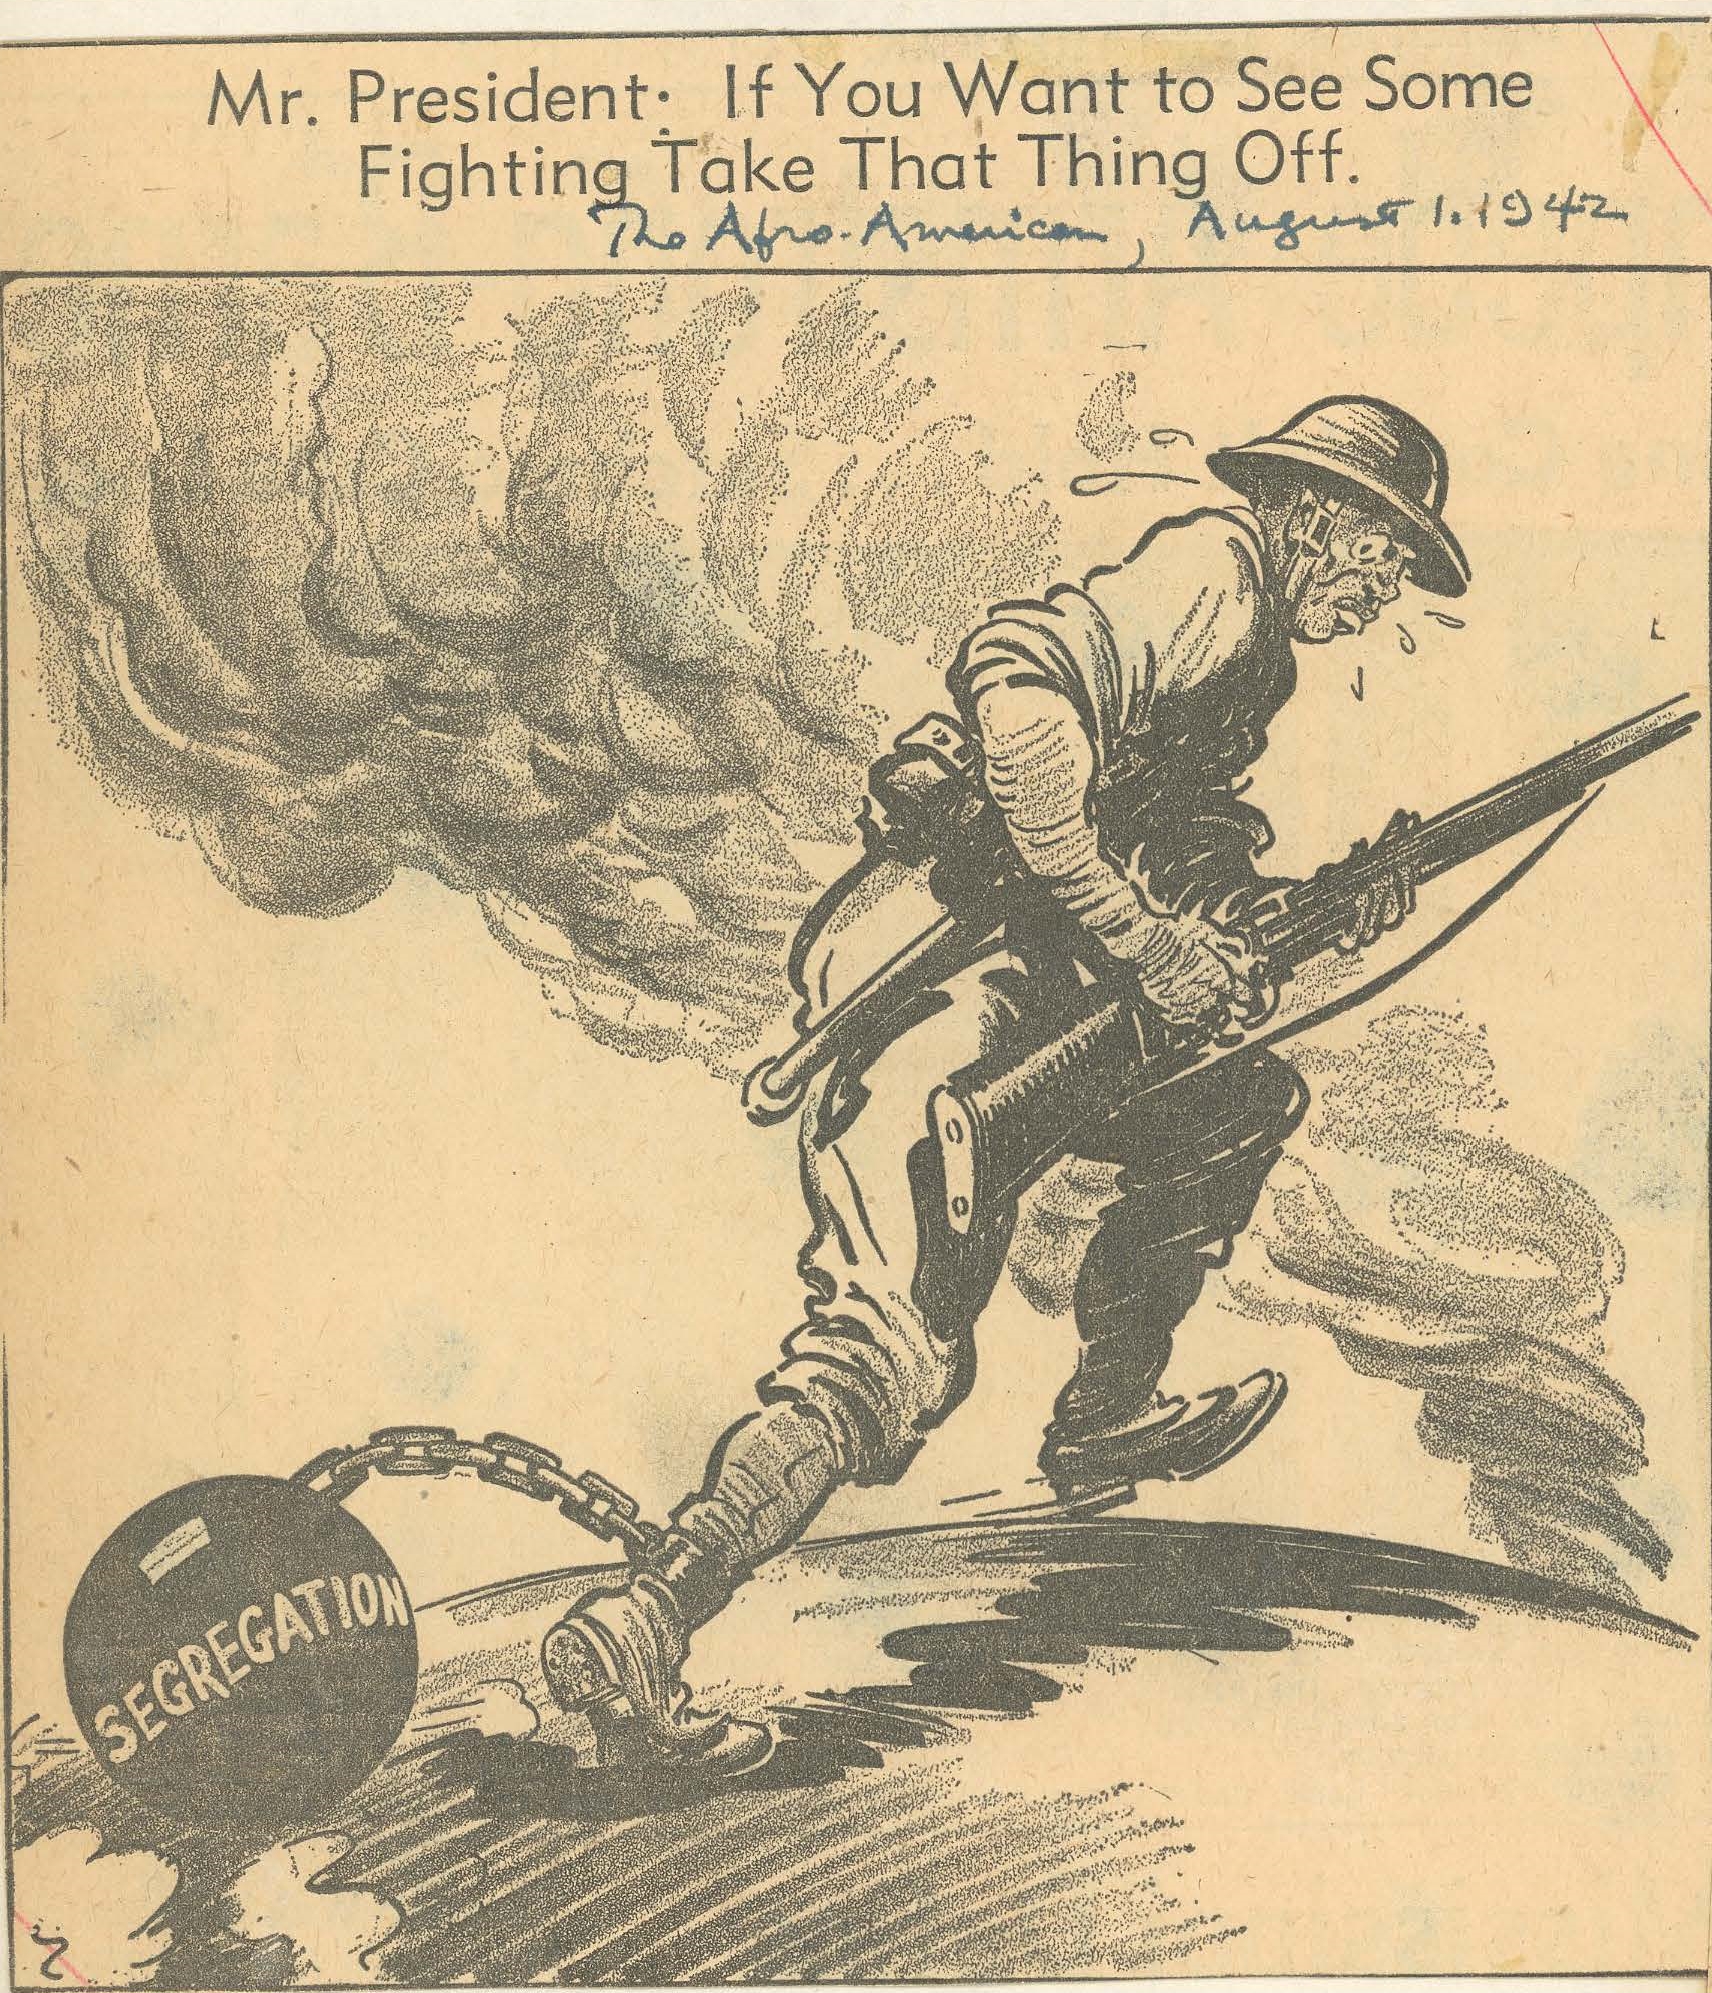 The political cartoon depicts an African-American soldier leaning forward carrying a weapon. A ball and chain is shackled to his right ankle. The ball is labeled "SEGREGATION." The caption reads "Mr. President: If You Want to See Some Fighting Take That Thing Off. African-American, August 1, 1942"